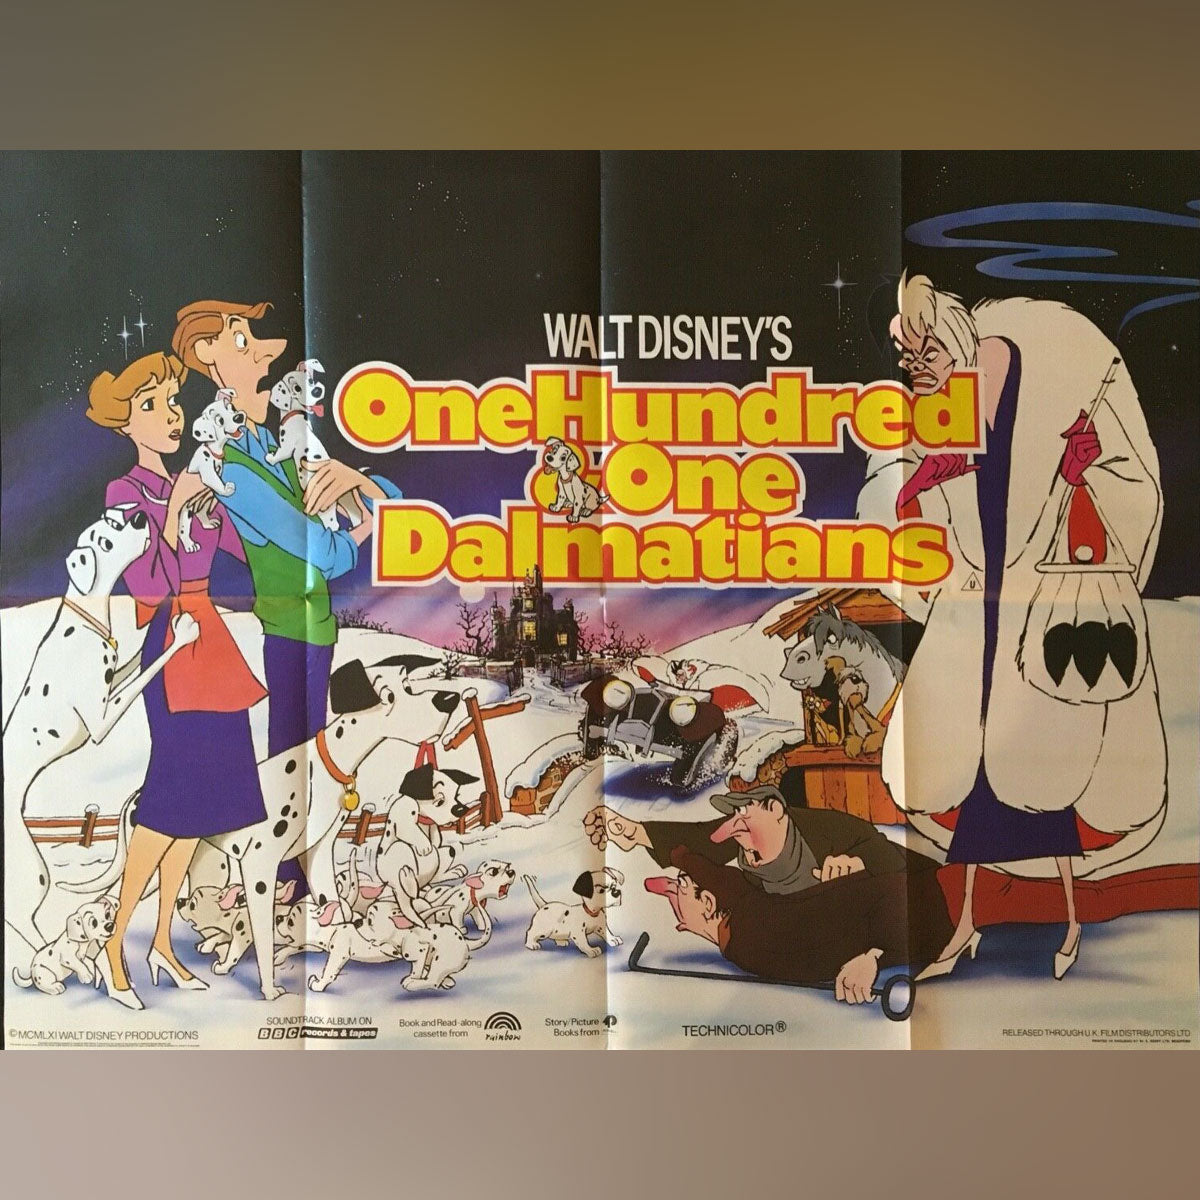 One Hundred and One Dalmatians (1979)